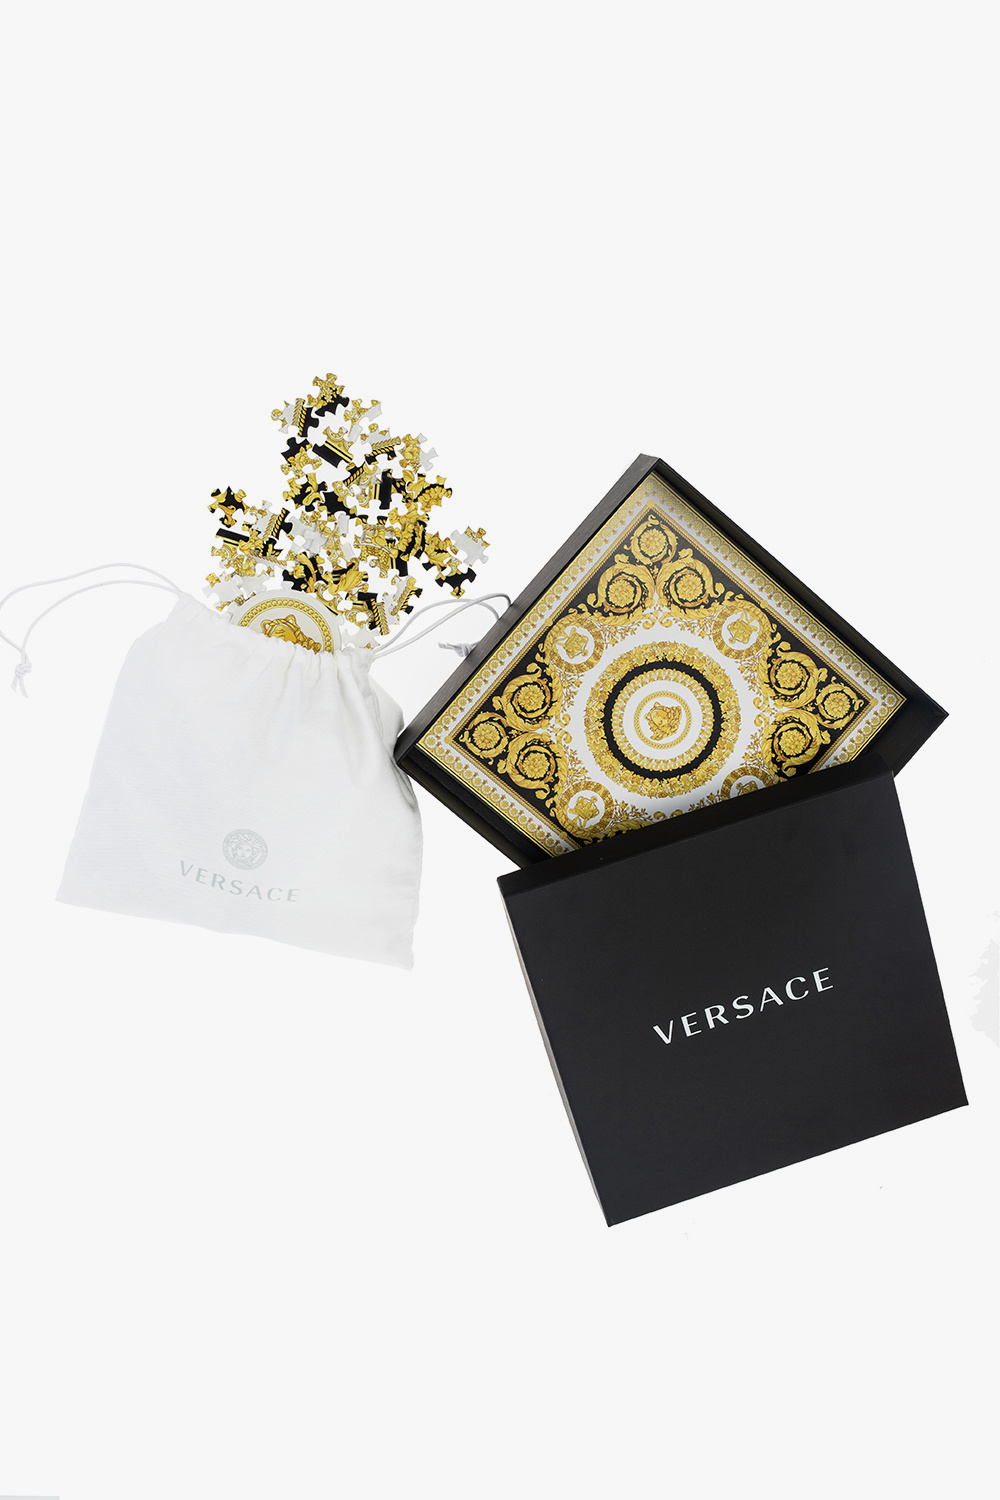 Versace Home Lets keep in touch